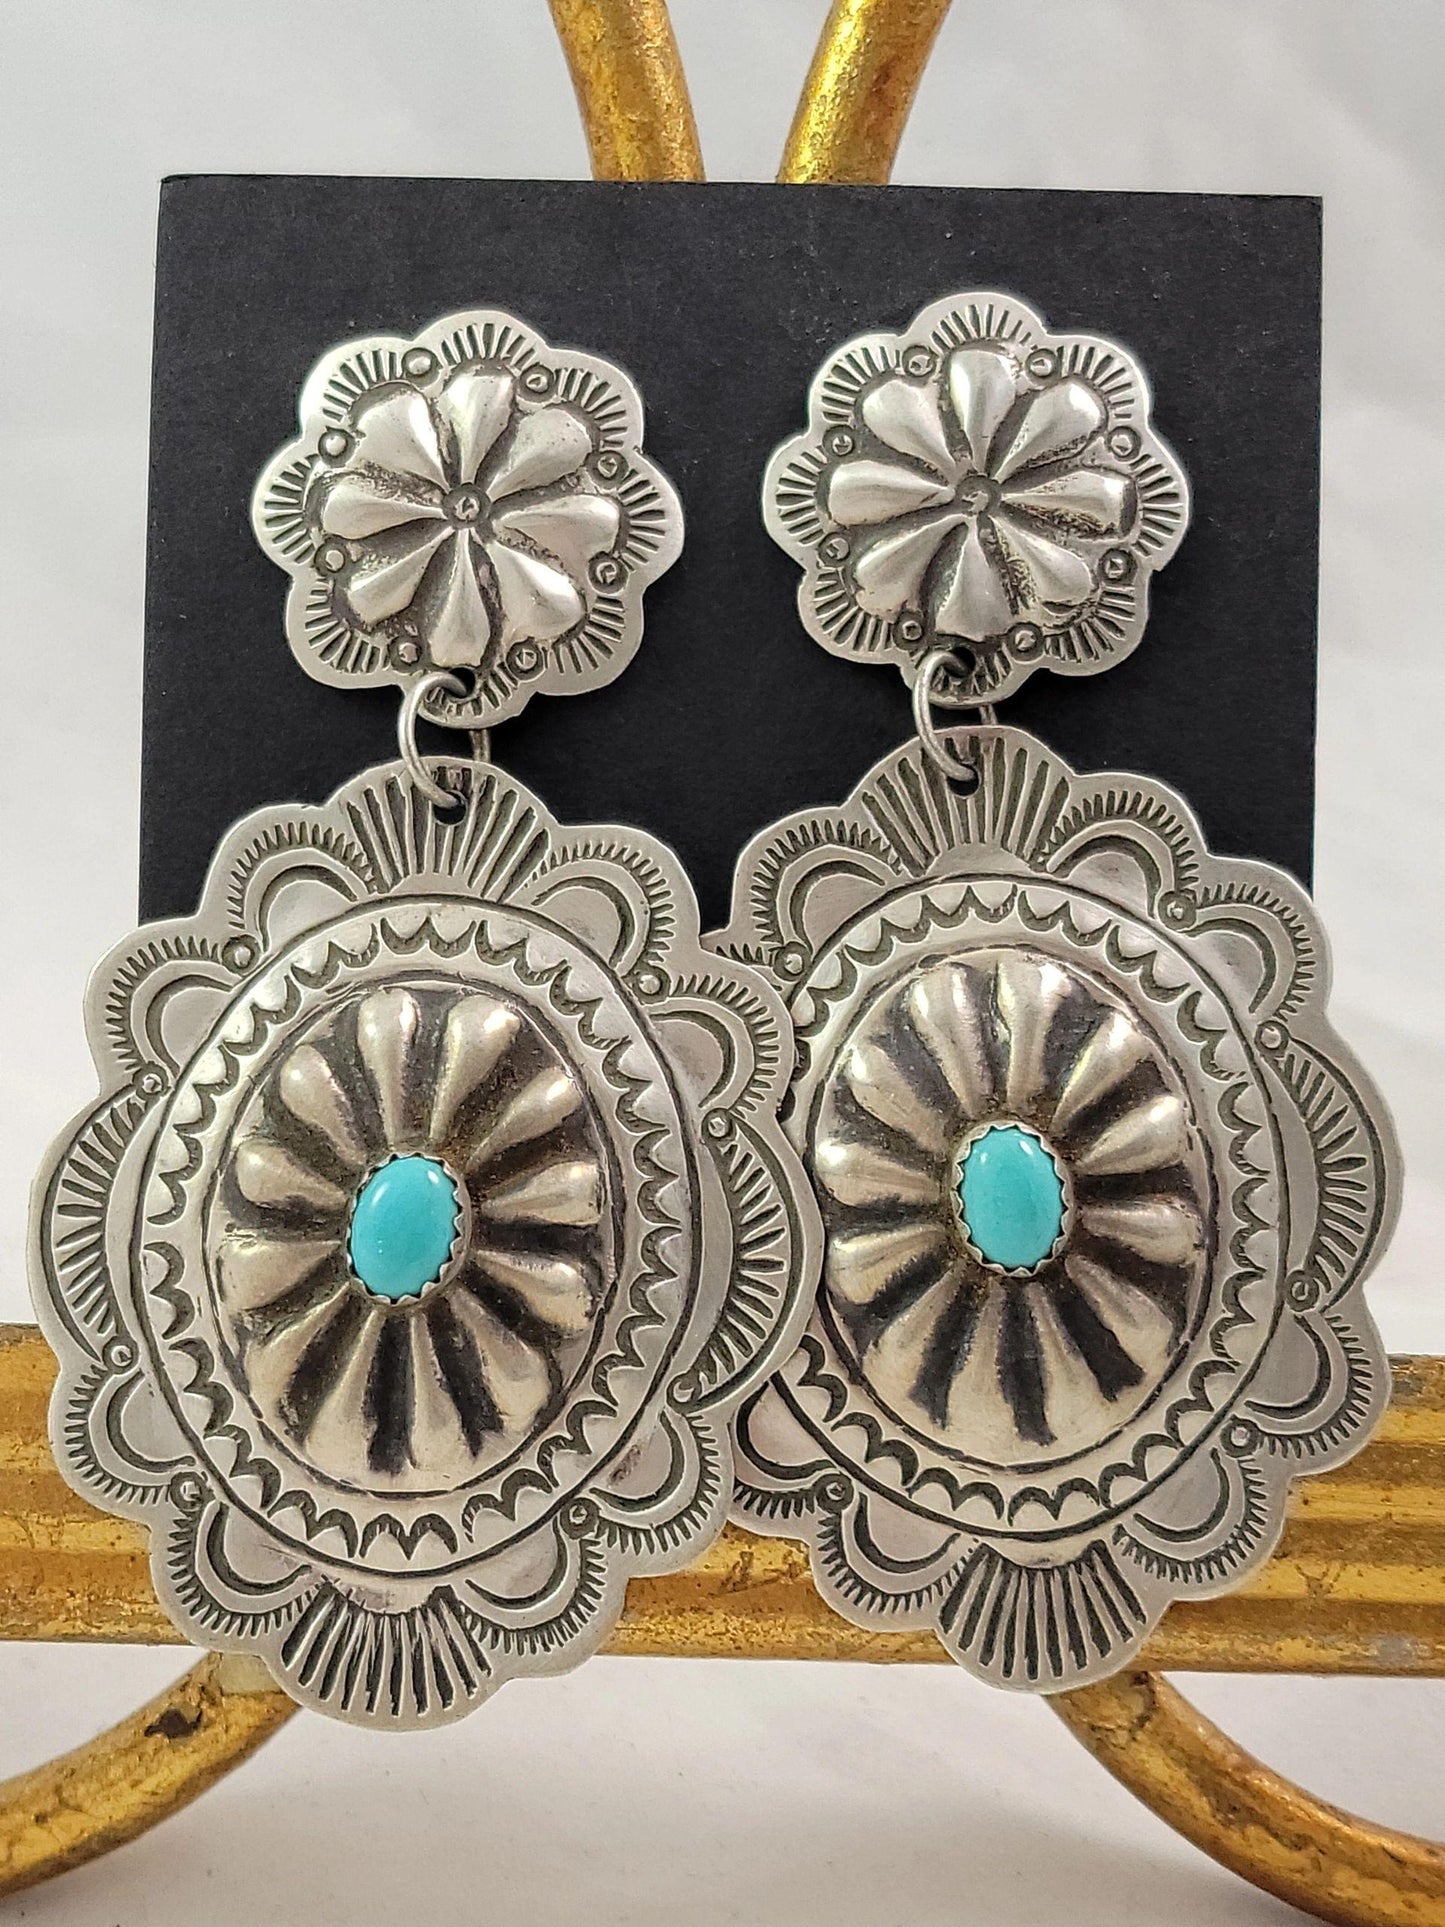 Turquoise oval concho earrings - Albuquerque Pawn Shop